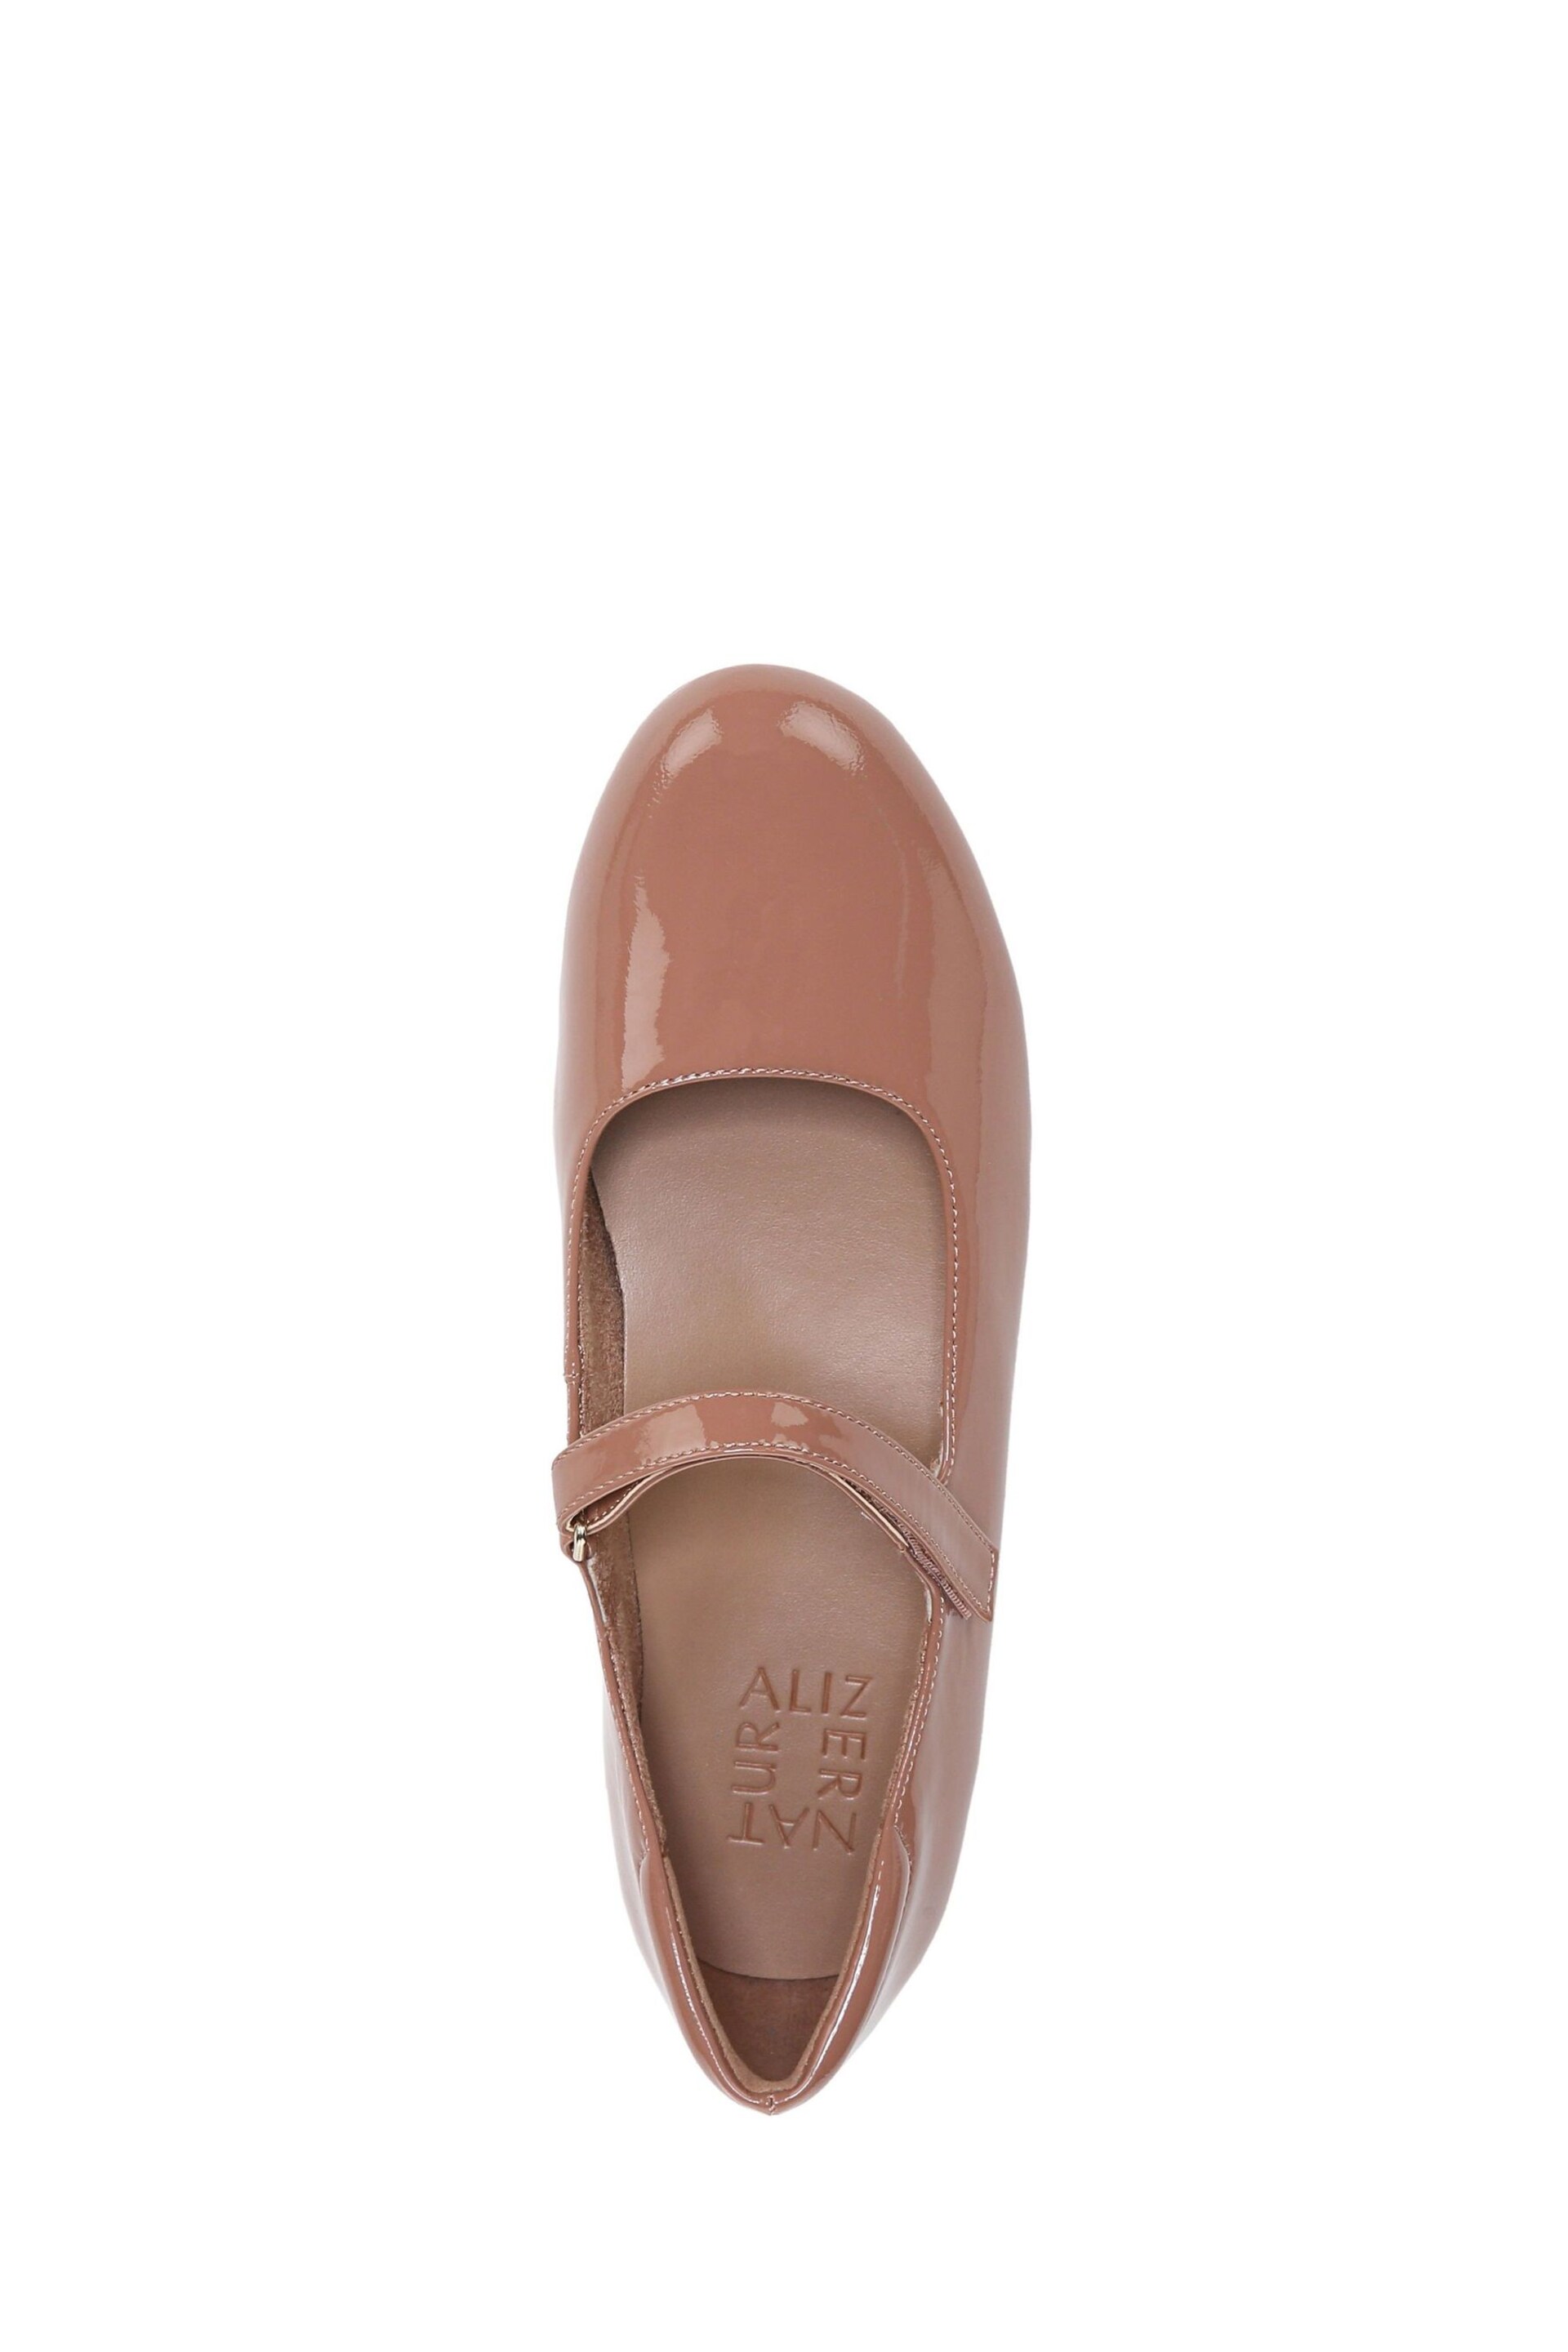 Naturalizer Maxwell Mary Janes Leather Shoes - Image 6 of 7